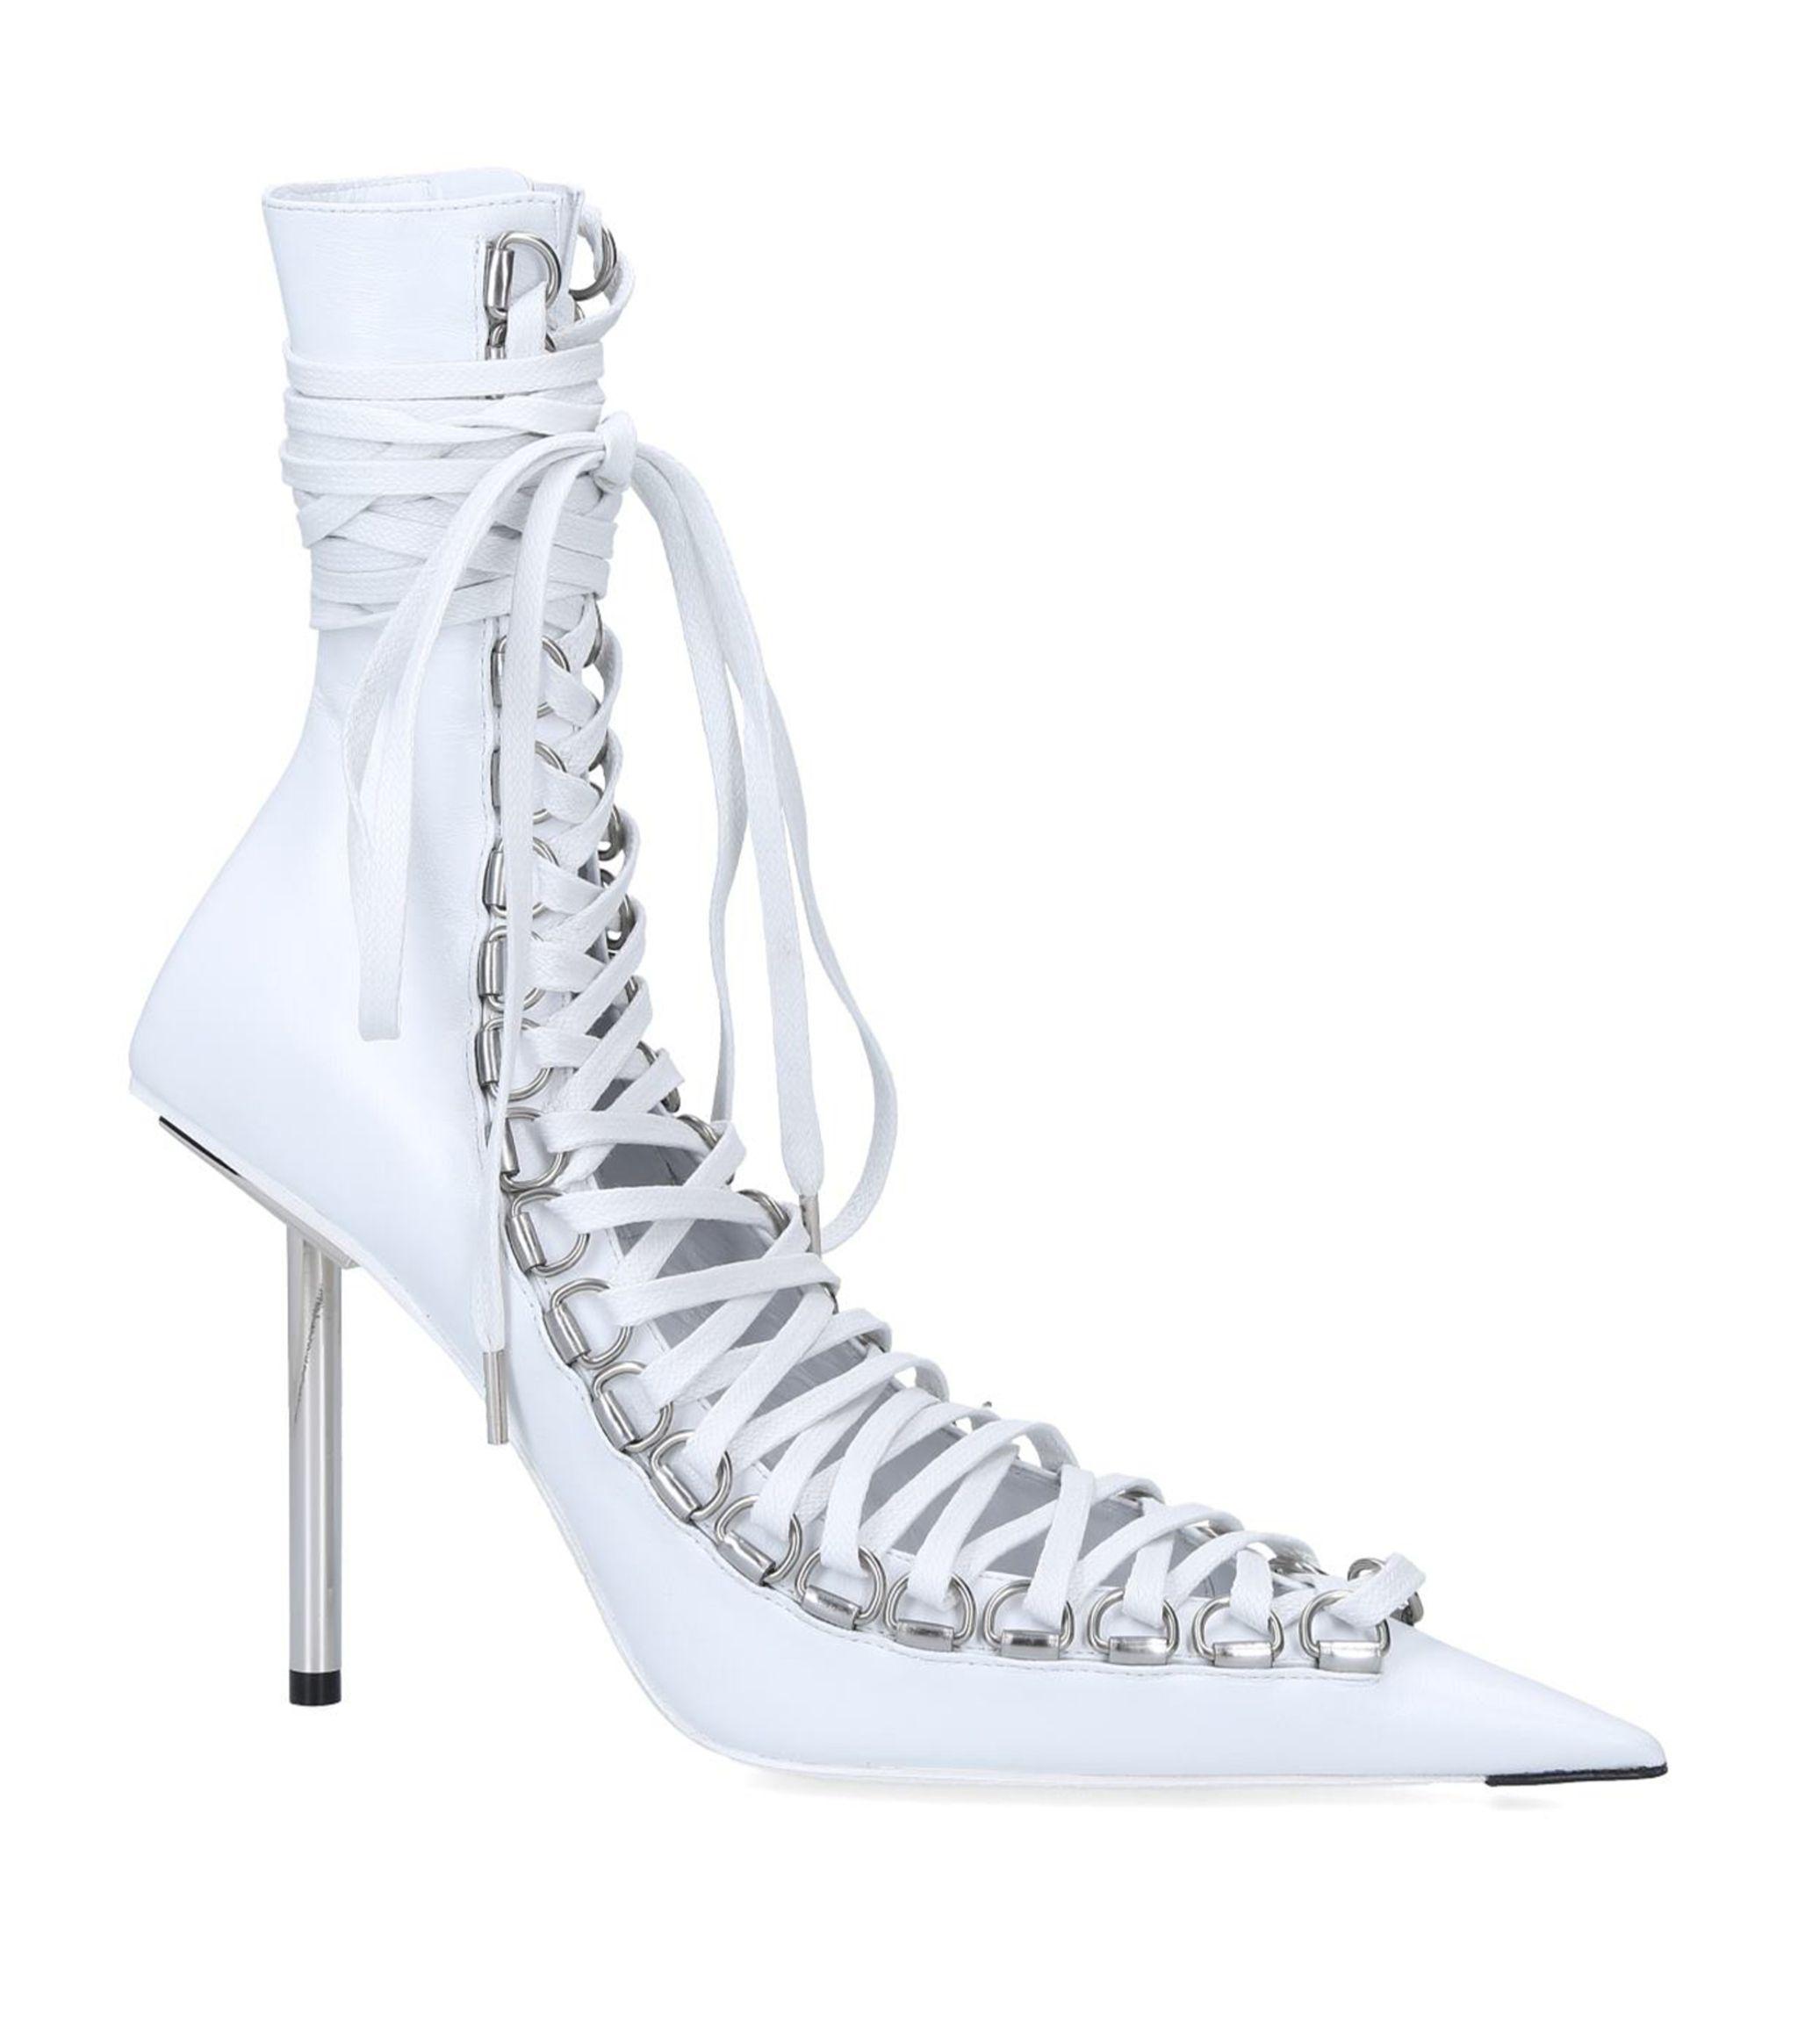 Balenciaga Leather Ankle Boots 110 in White | Lyst